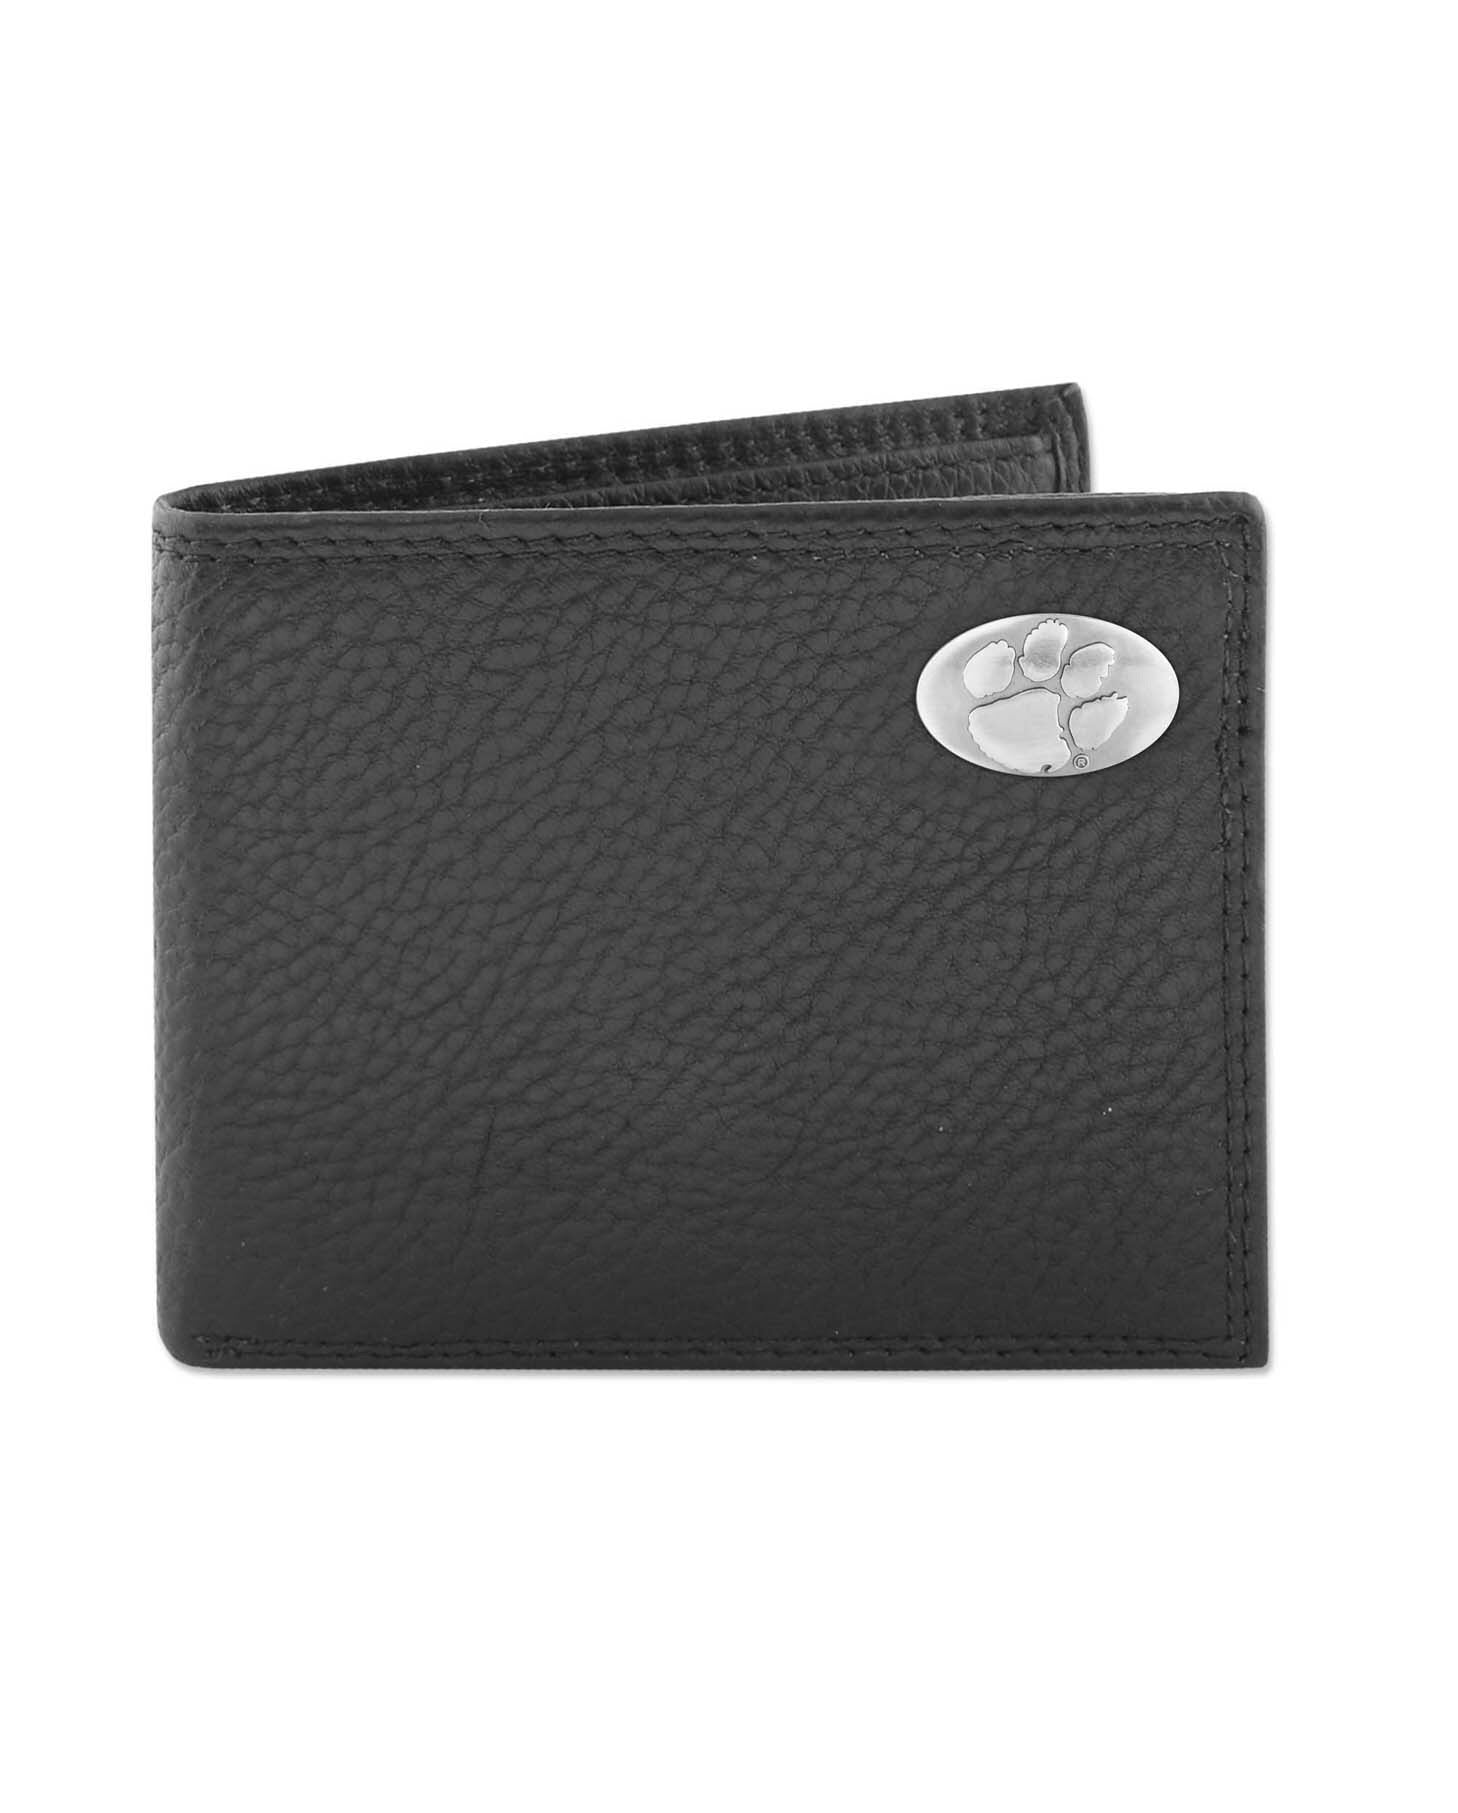 Zeppro Leather Wallet with College Emblem